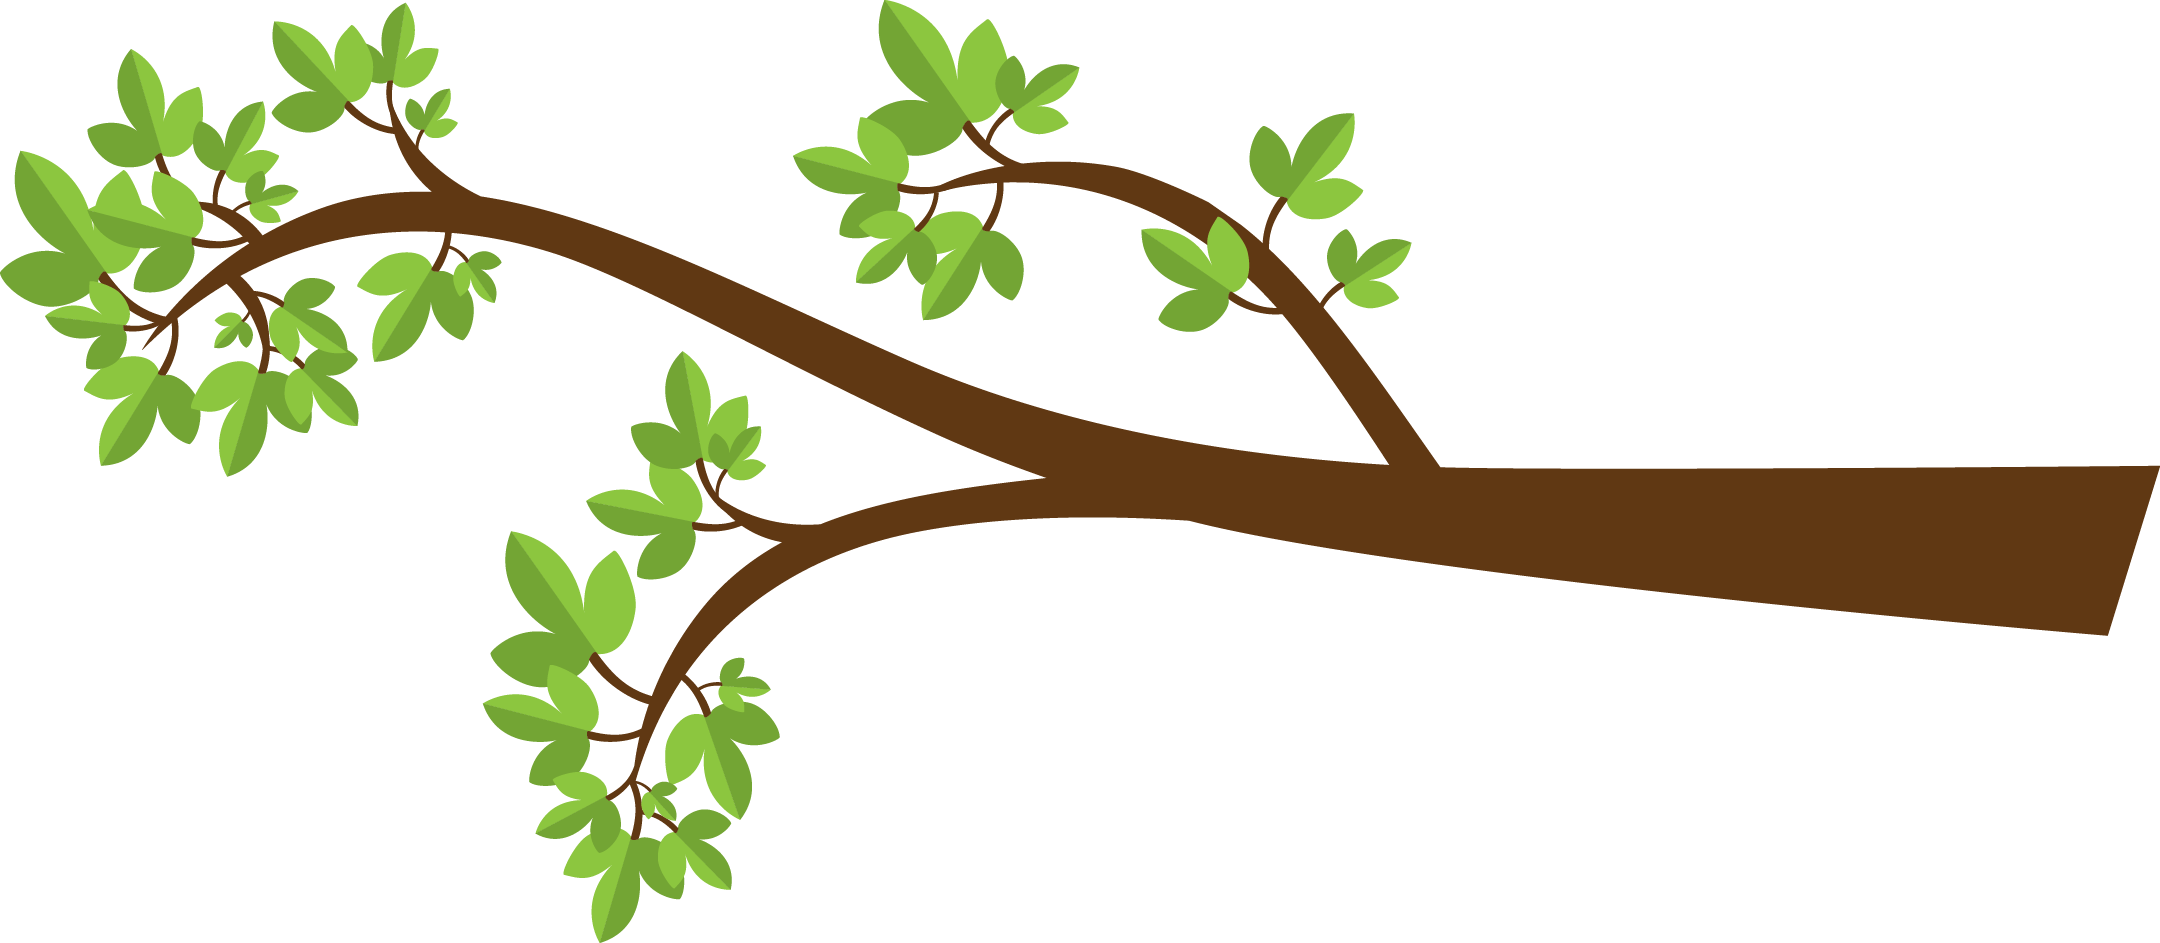 Image Of Tree Branch - ClipArt Best